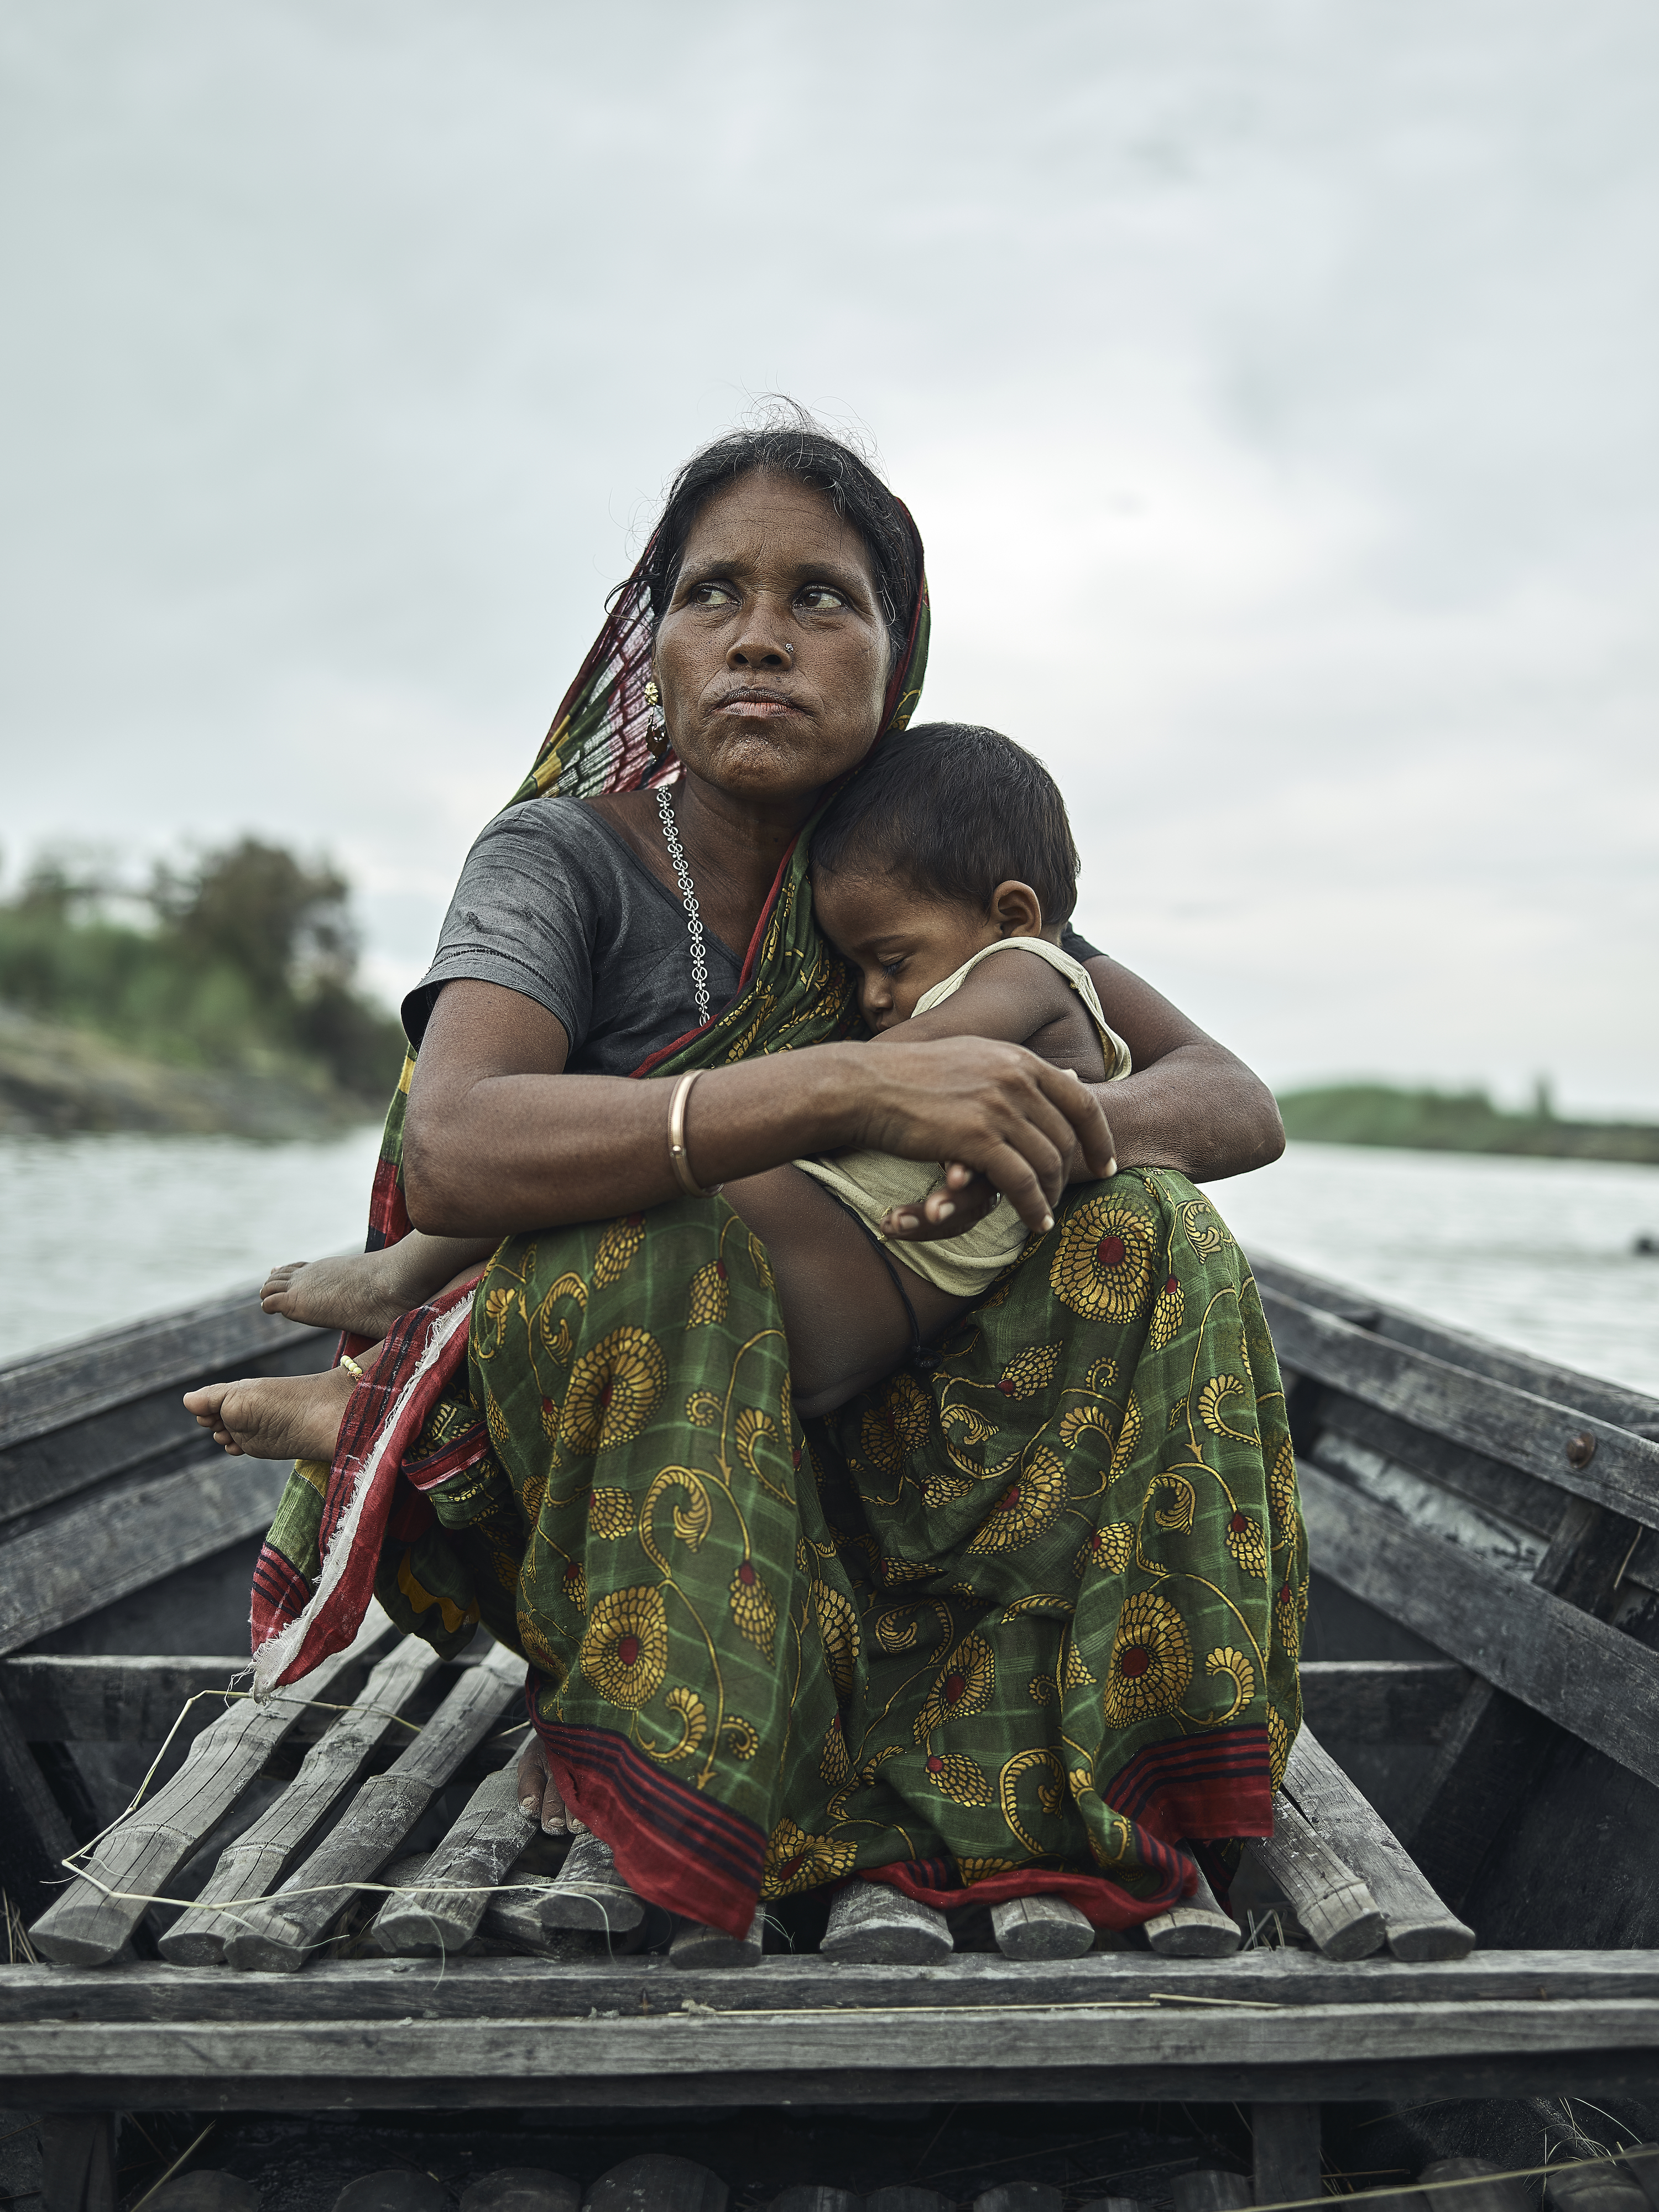 Firoza Khatun’s husband abandoned her family after their char eroded decades ago. Since then, she has raised her children alone, and continued to pay taxes on the submerged land in hope that it may emerge and she can pass it on to her children. “My heart won’t let me leave this place.”